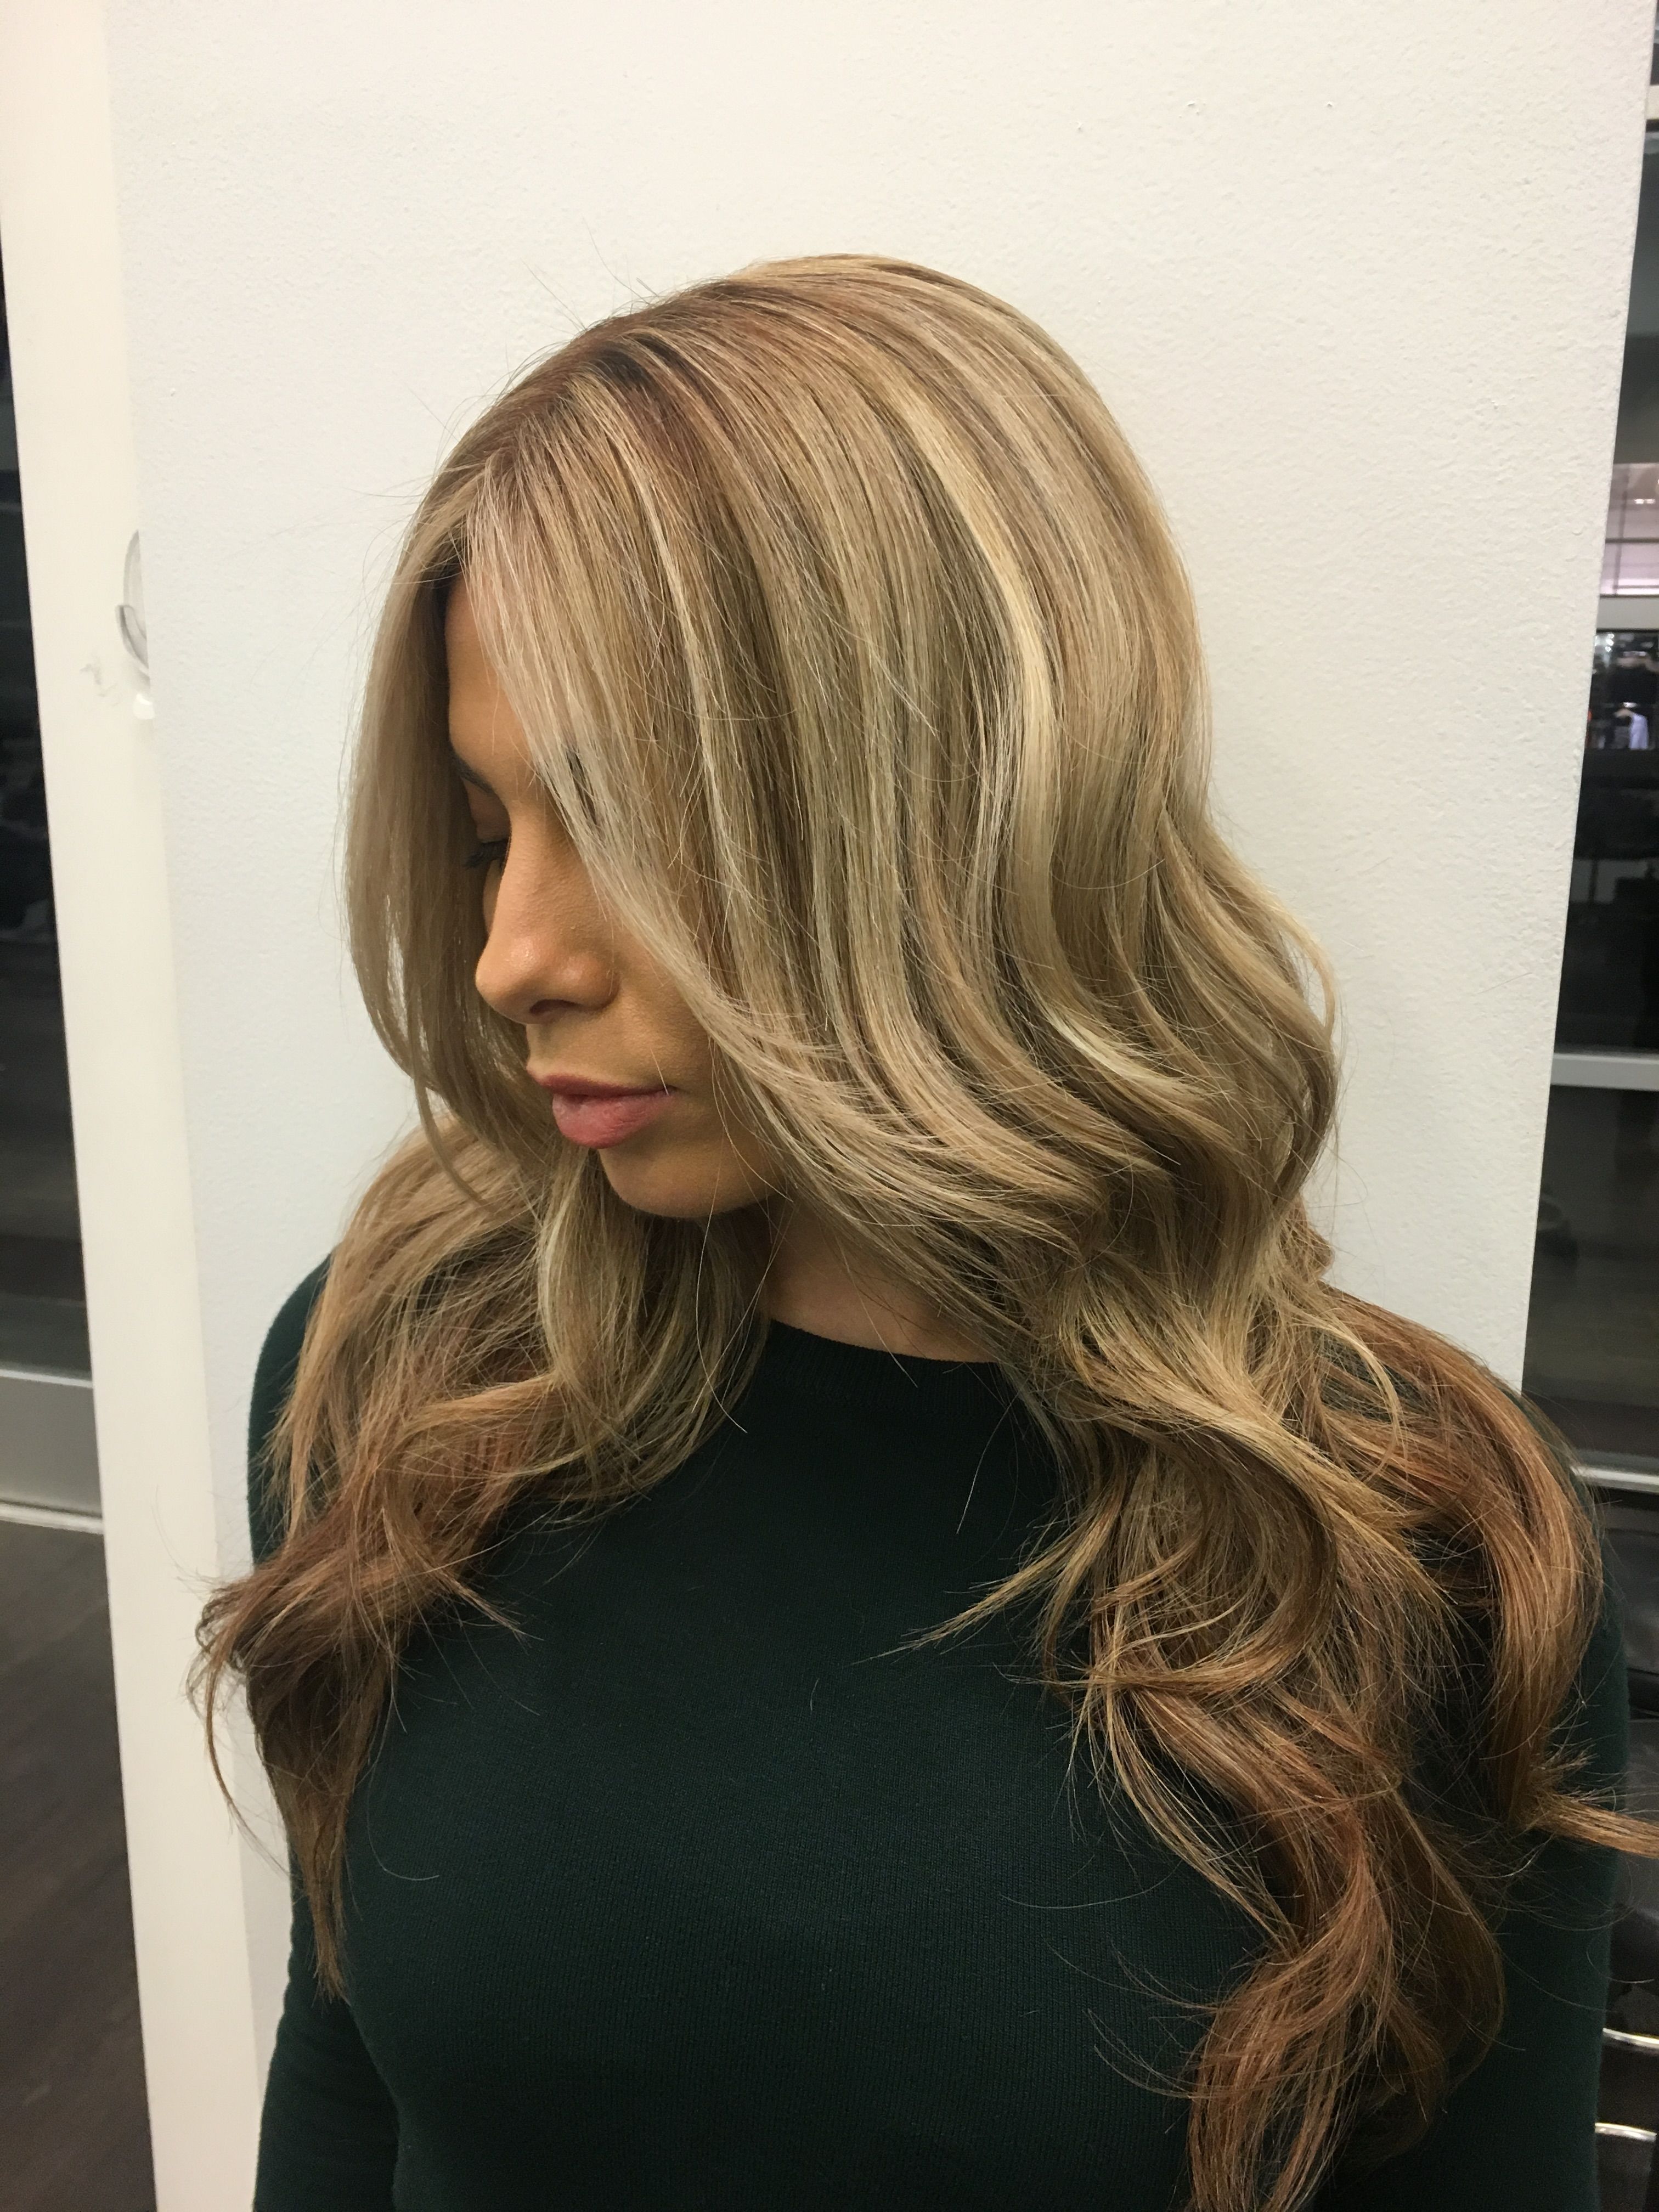 Classic Blonde Hair Highlights | Blonde Hair With Highlights, Hair  Highlights, Long Hair Styles Within The Classic Blonde Haircut (View 18 of 25)